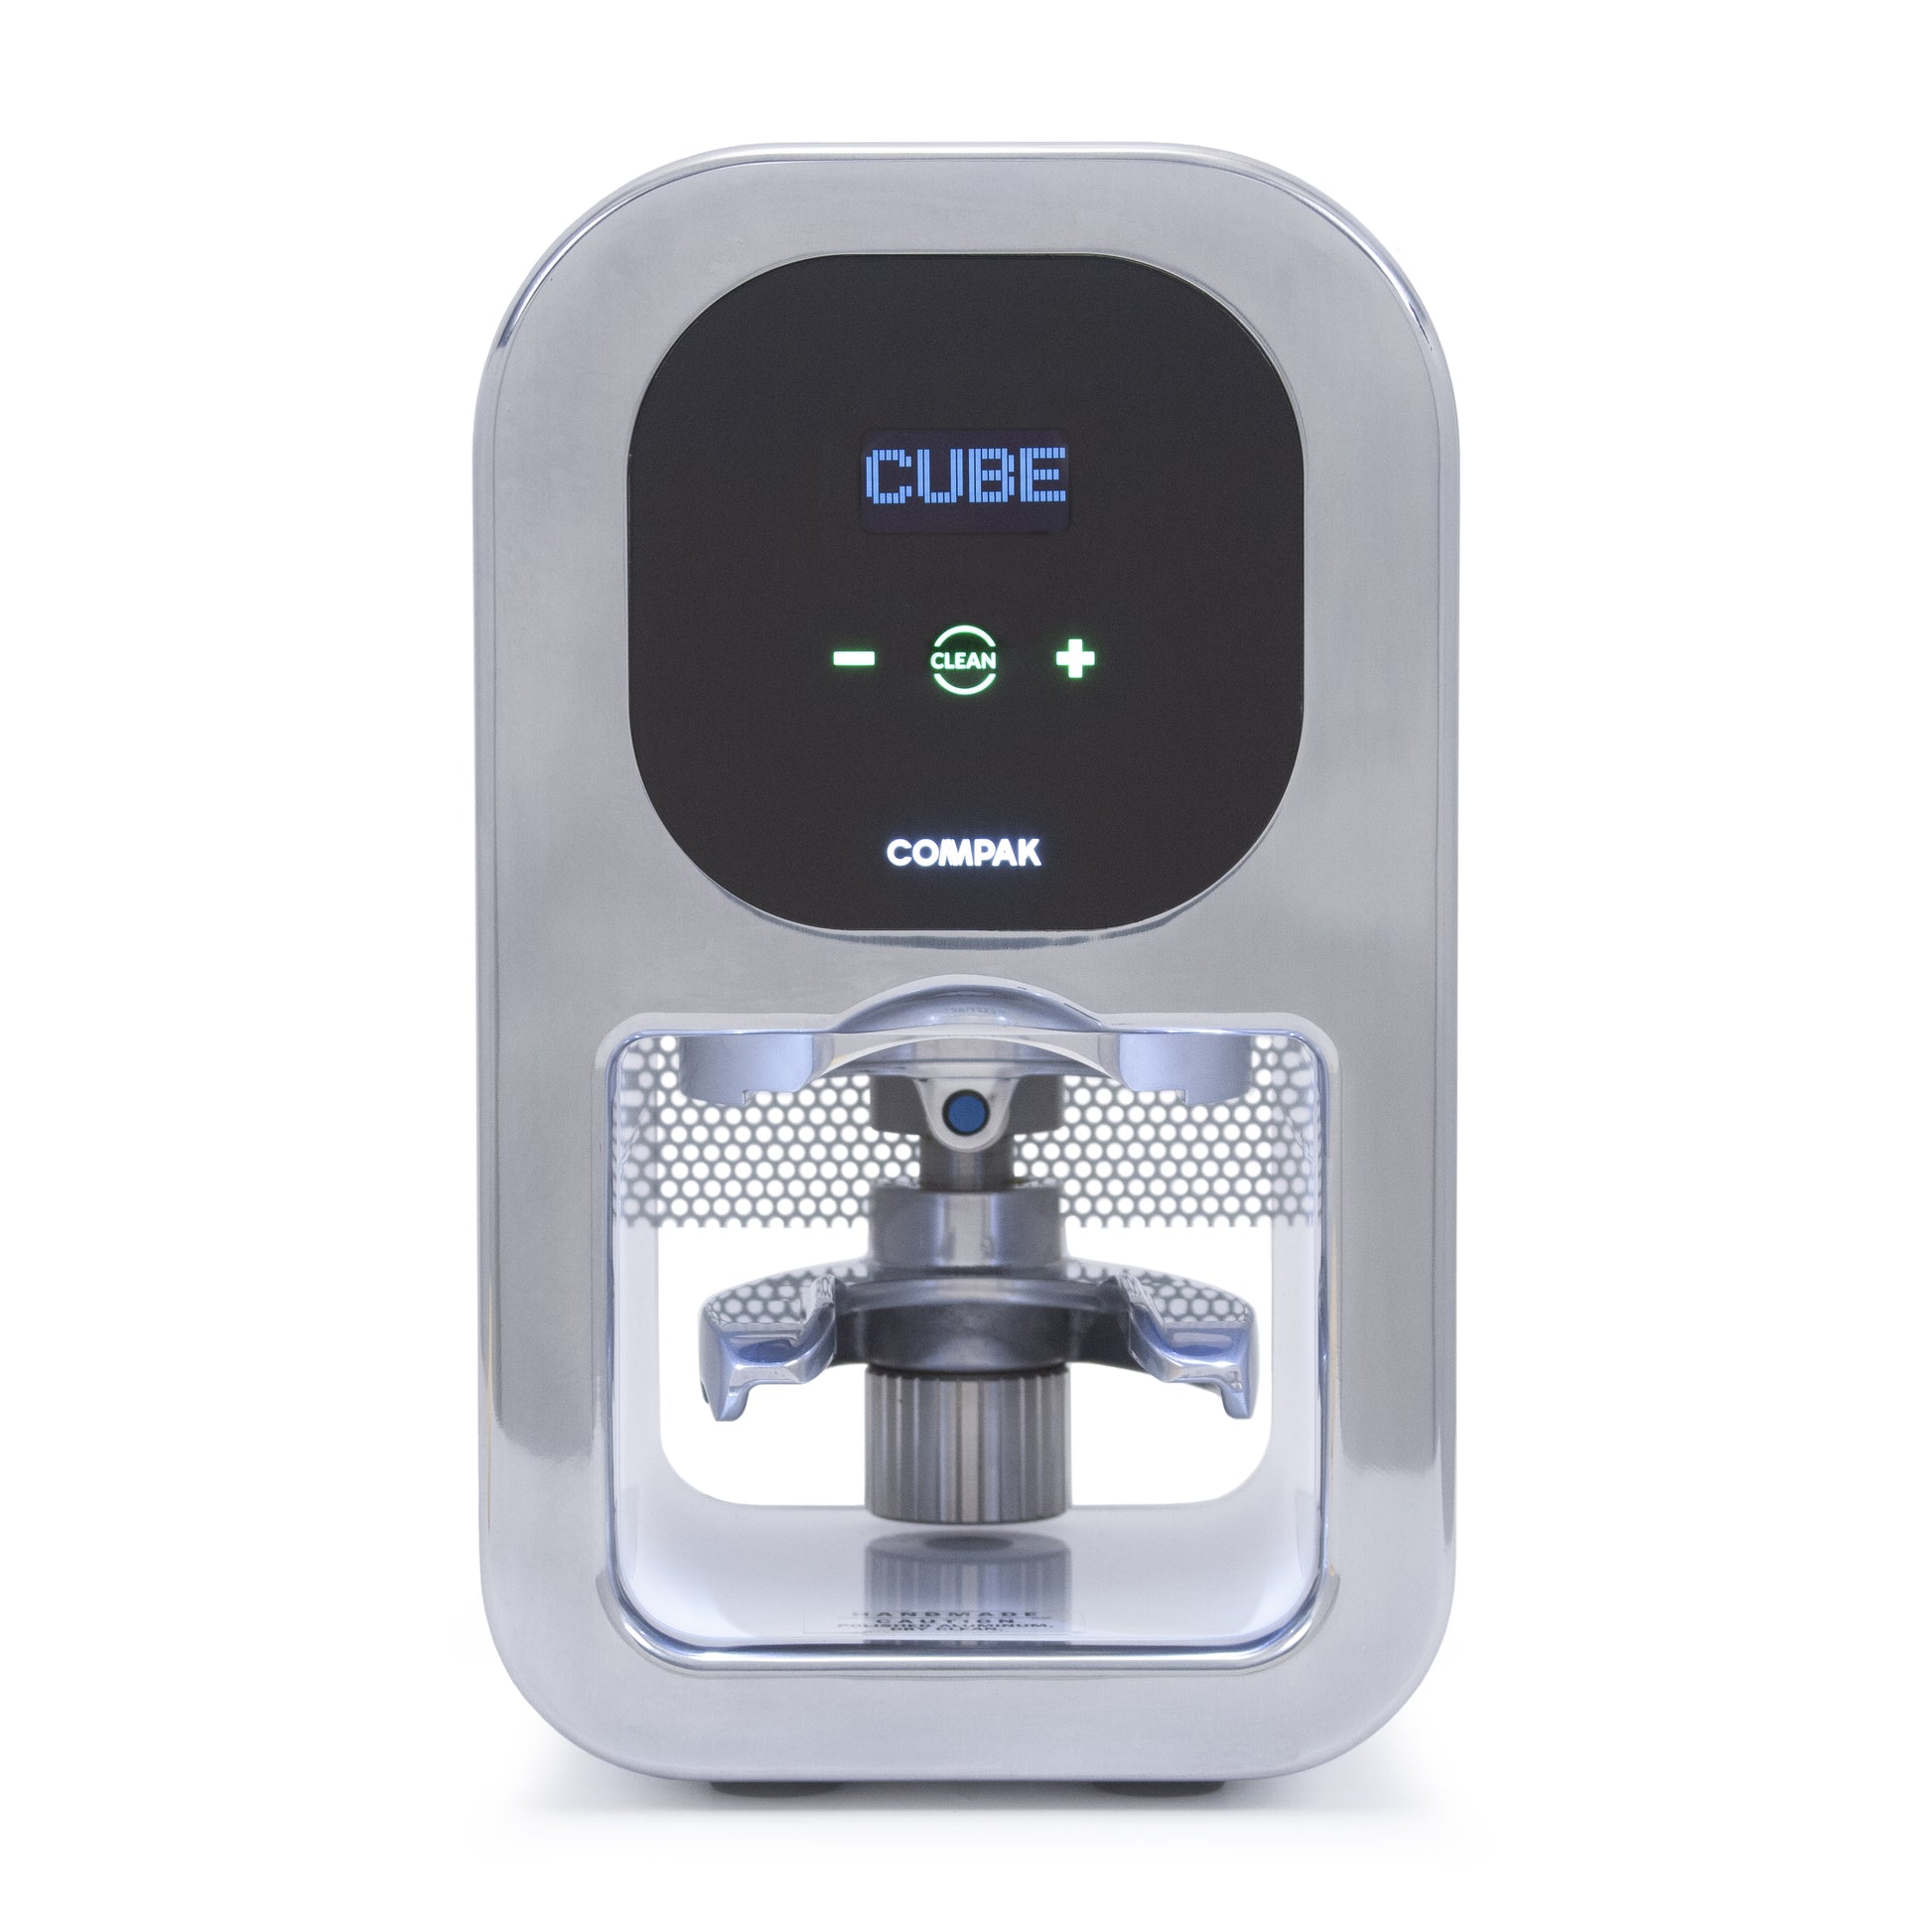 Compak Cube Tamper from the front.